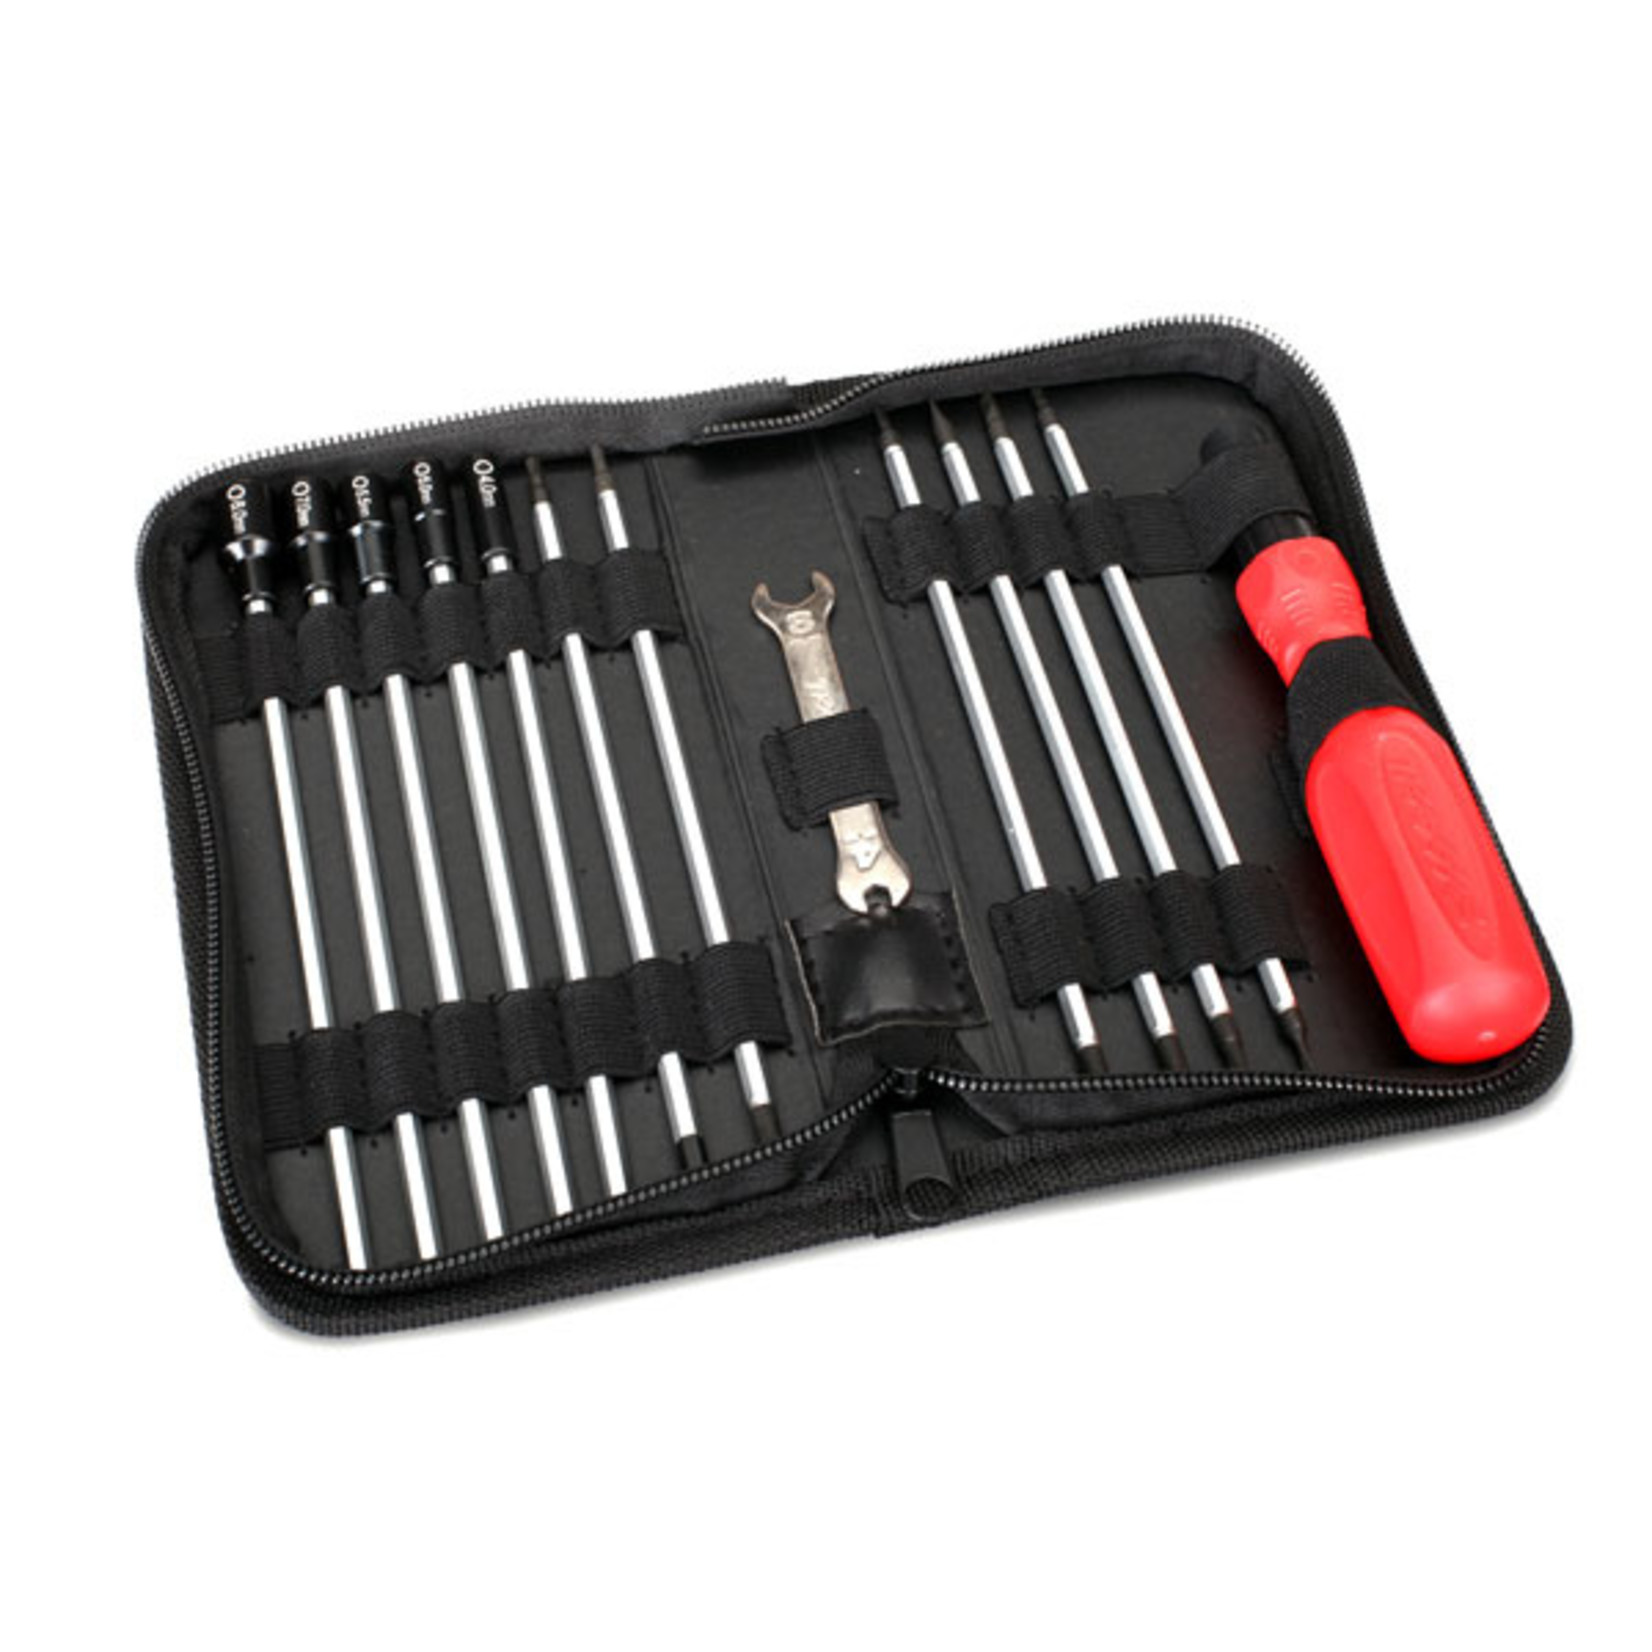 Traxxas 3415 - Tool set with pouch (includes 1.5mm, 2.0mm,